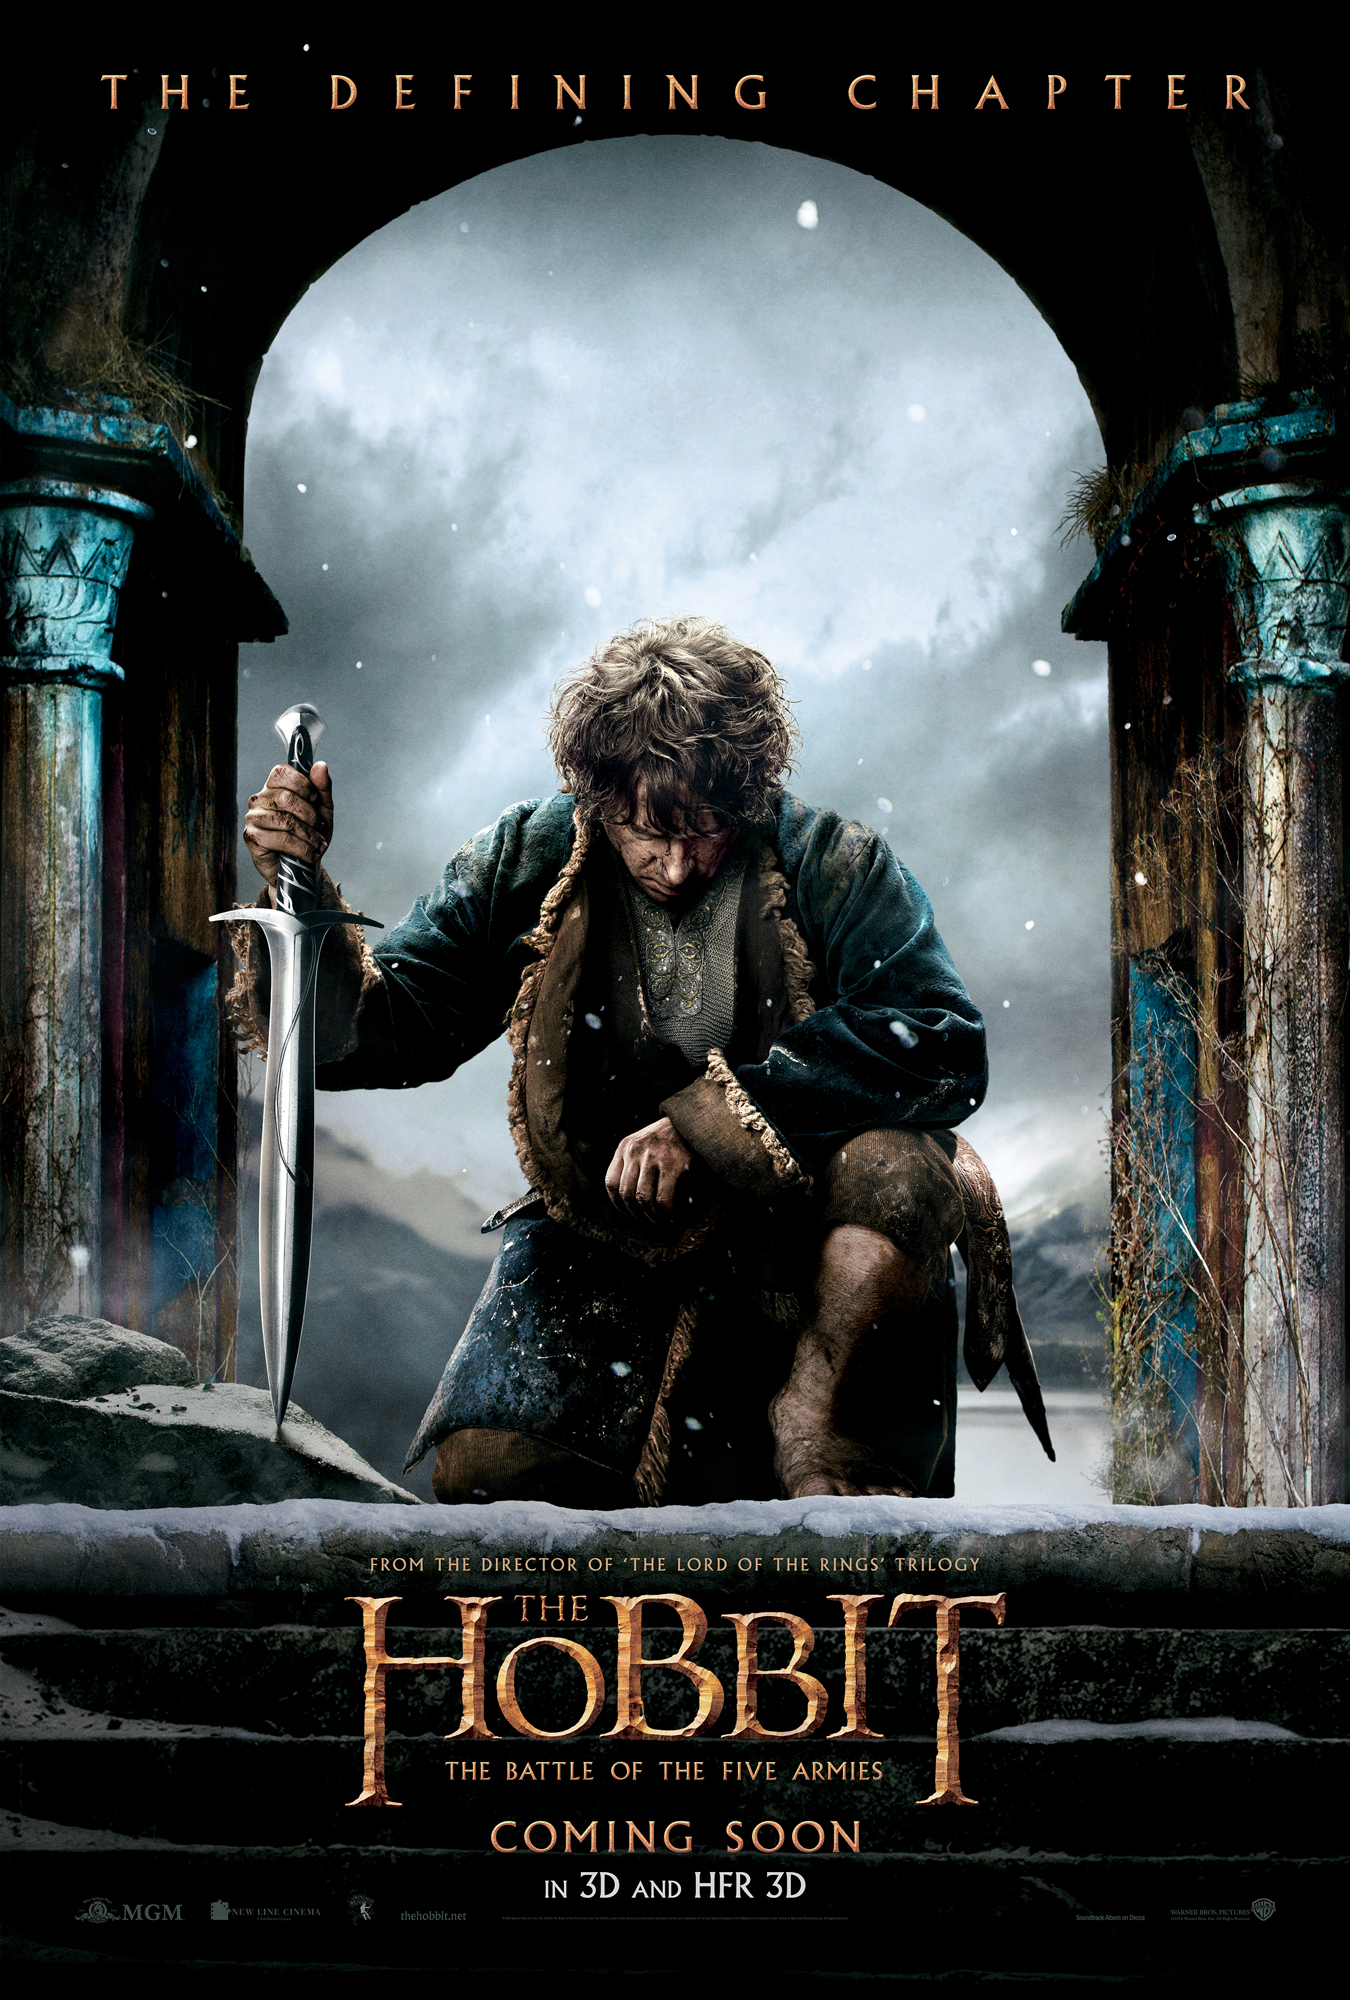 The lord of the rings 3 part in hindi download